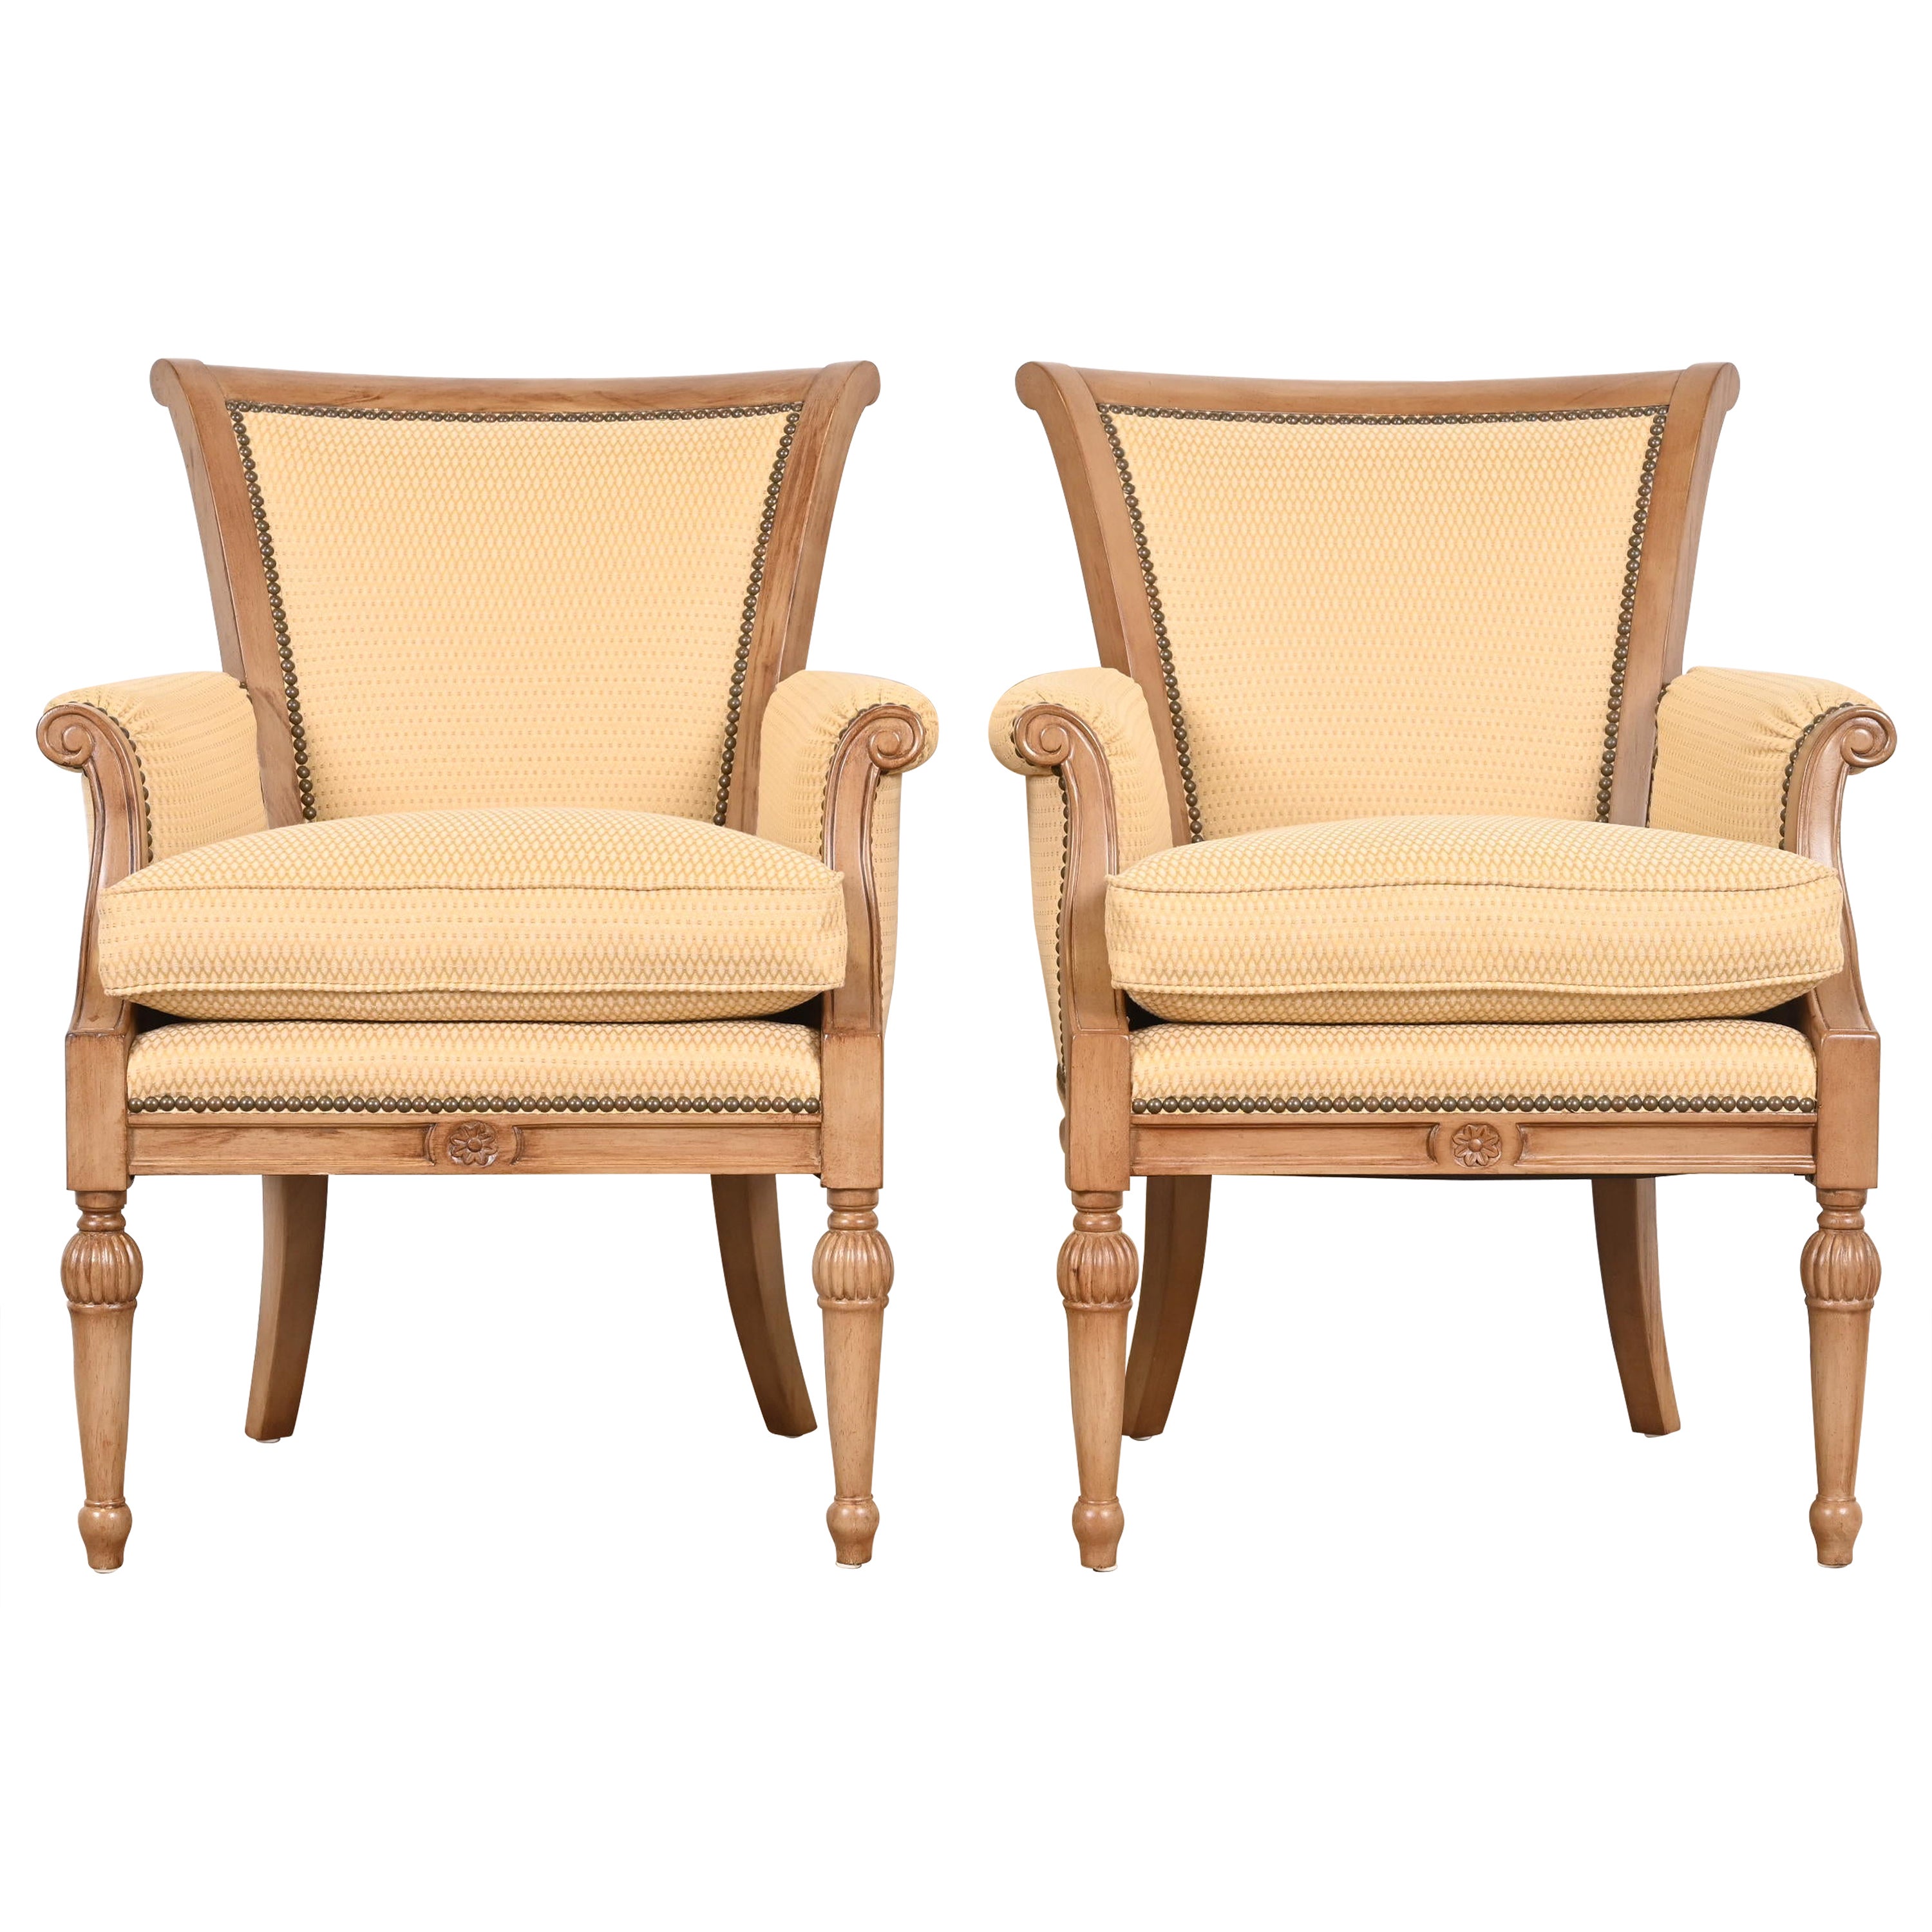 Barbara Barry for Henredon French Regency Louis XVI Bergere Chairs, Pair